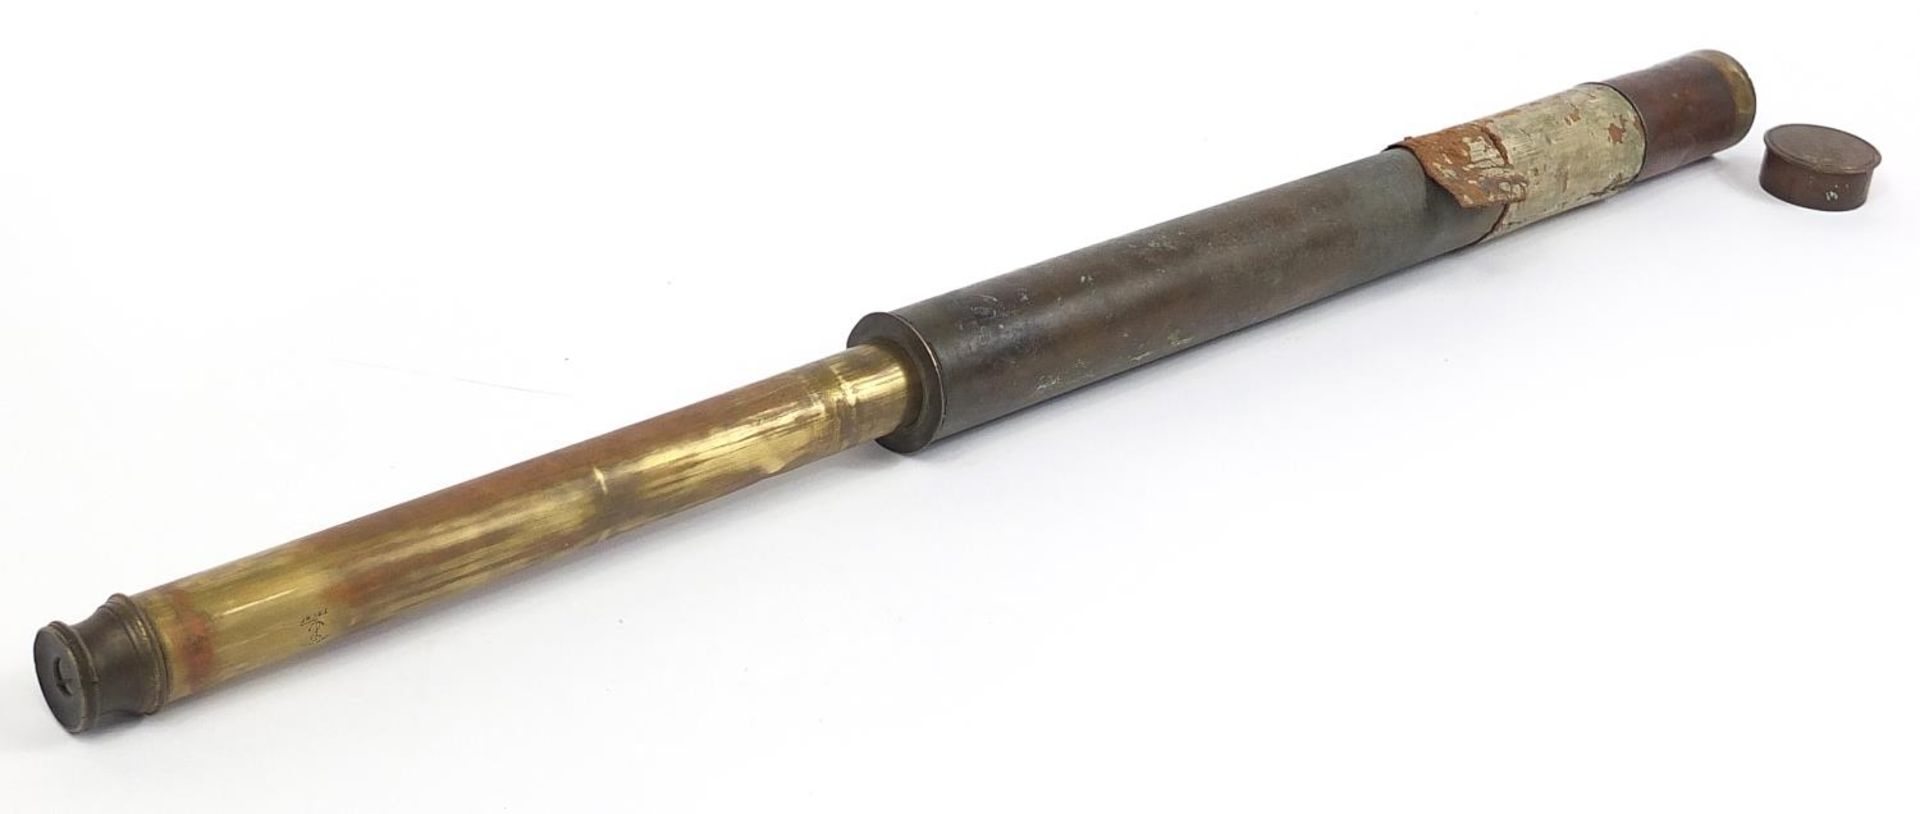 One draw brass naval telescope impressed Trademark Try Me, 53.5cm in length when closed - Image 2 of 3